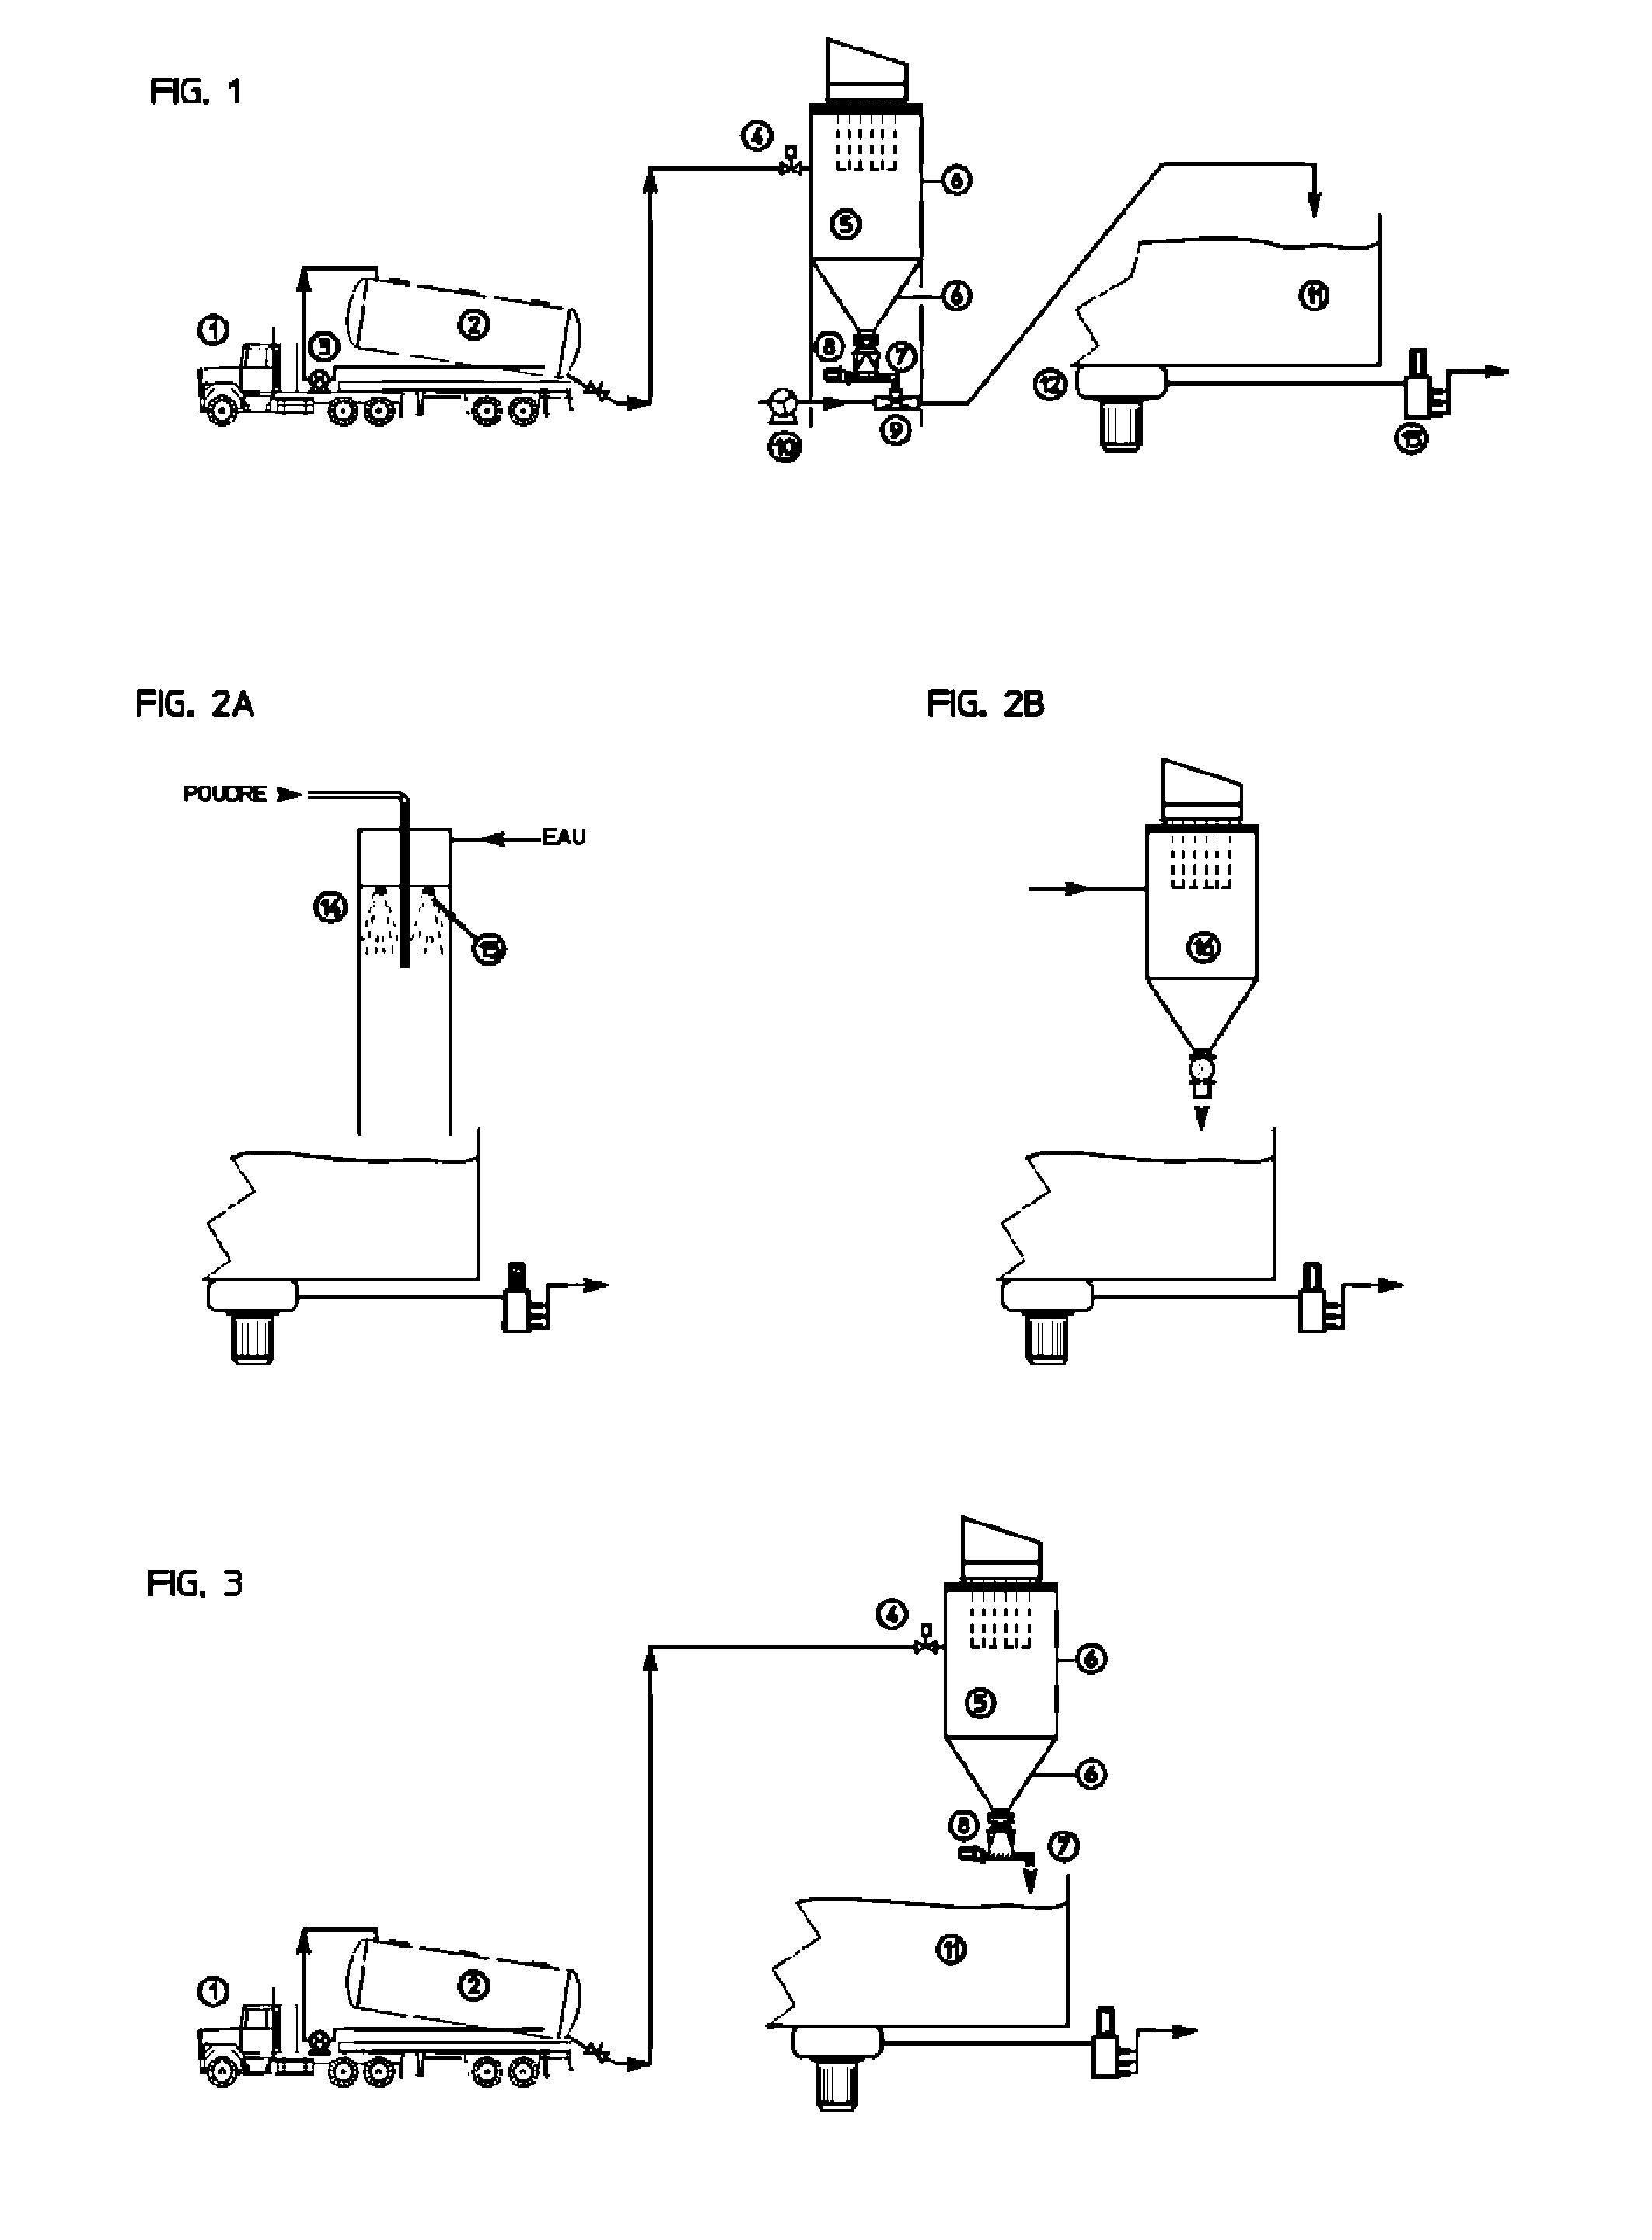 Equipment And Method Enabling To Directly Use Powder Polymer In Hydraulic Fracturing